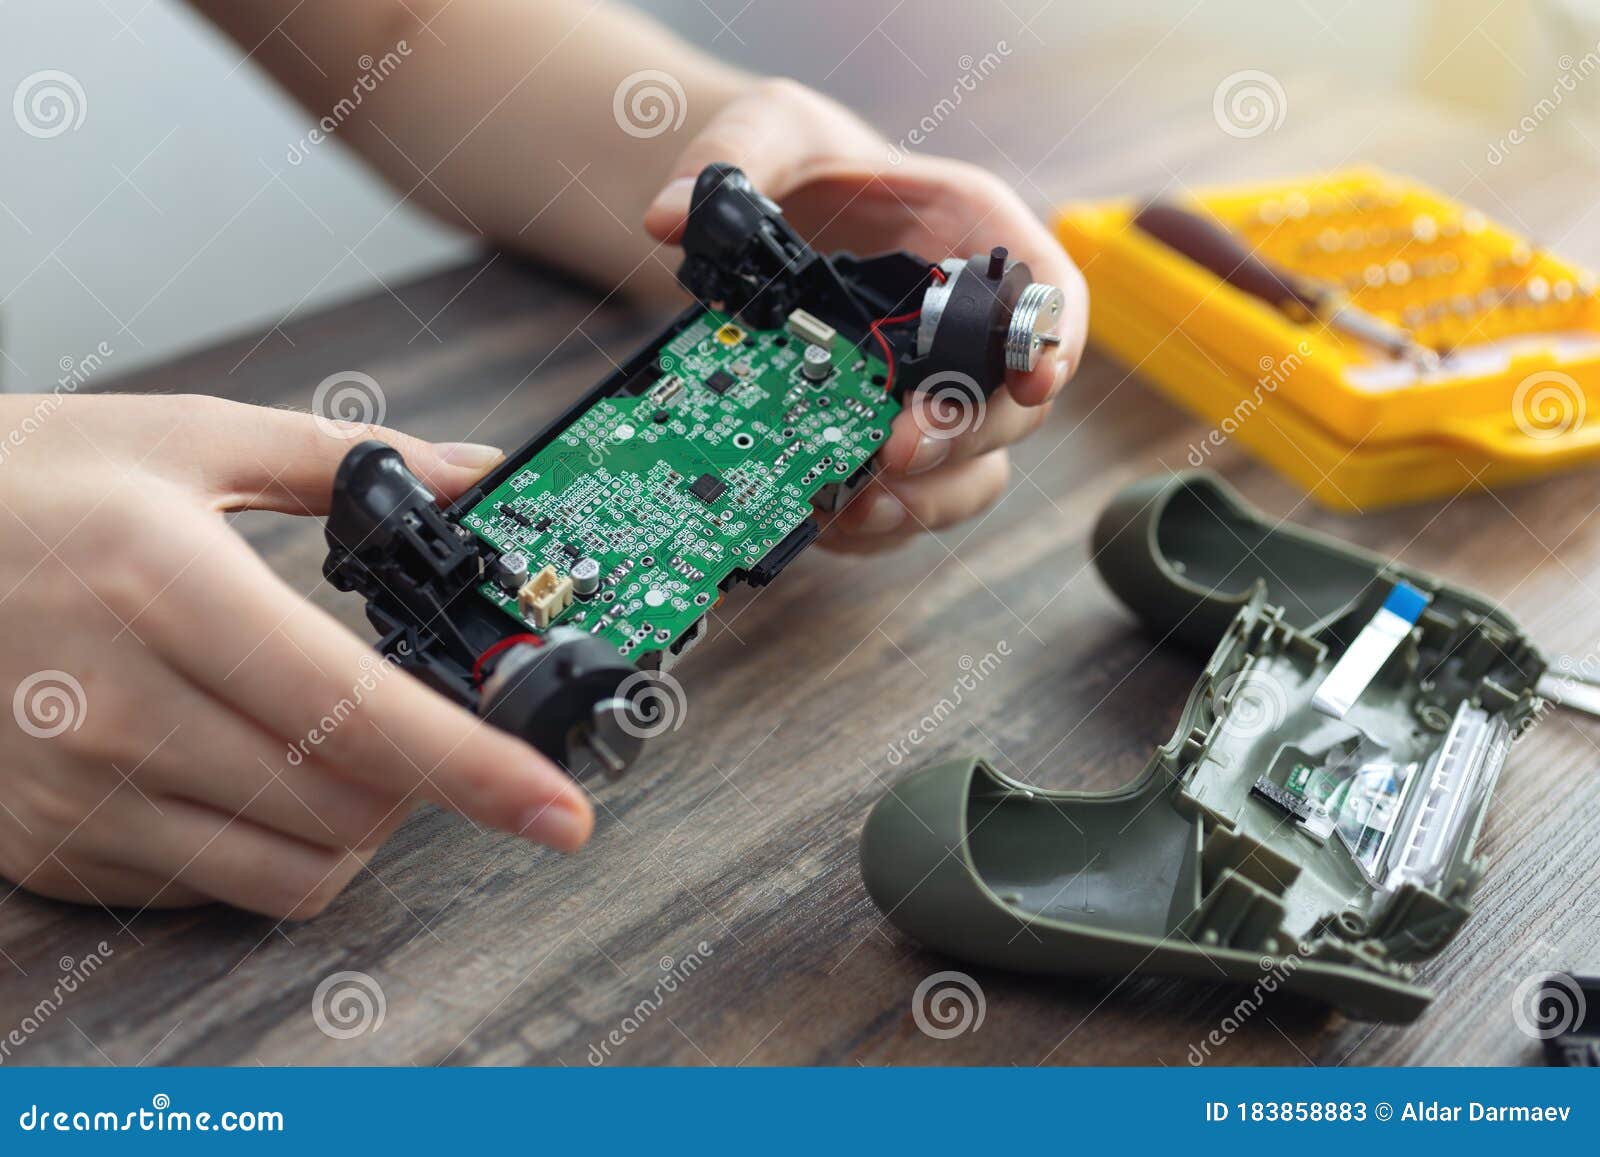 close up of disassemble game controller repairing, cleaning or diagnostic.